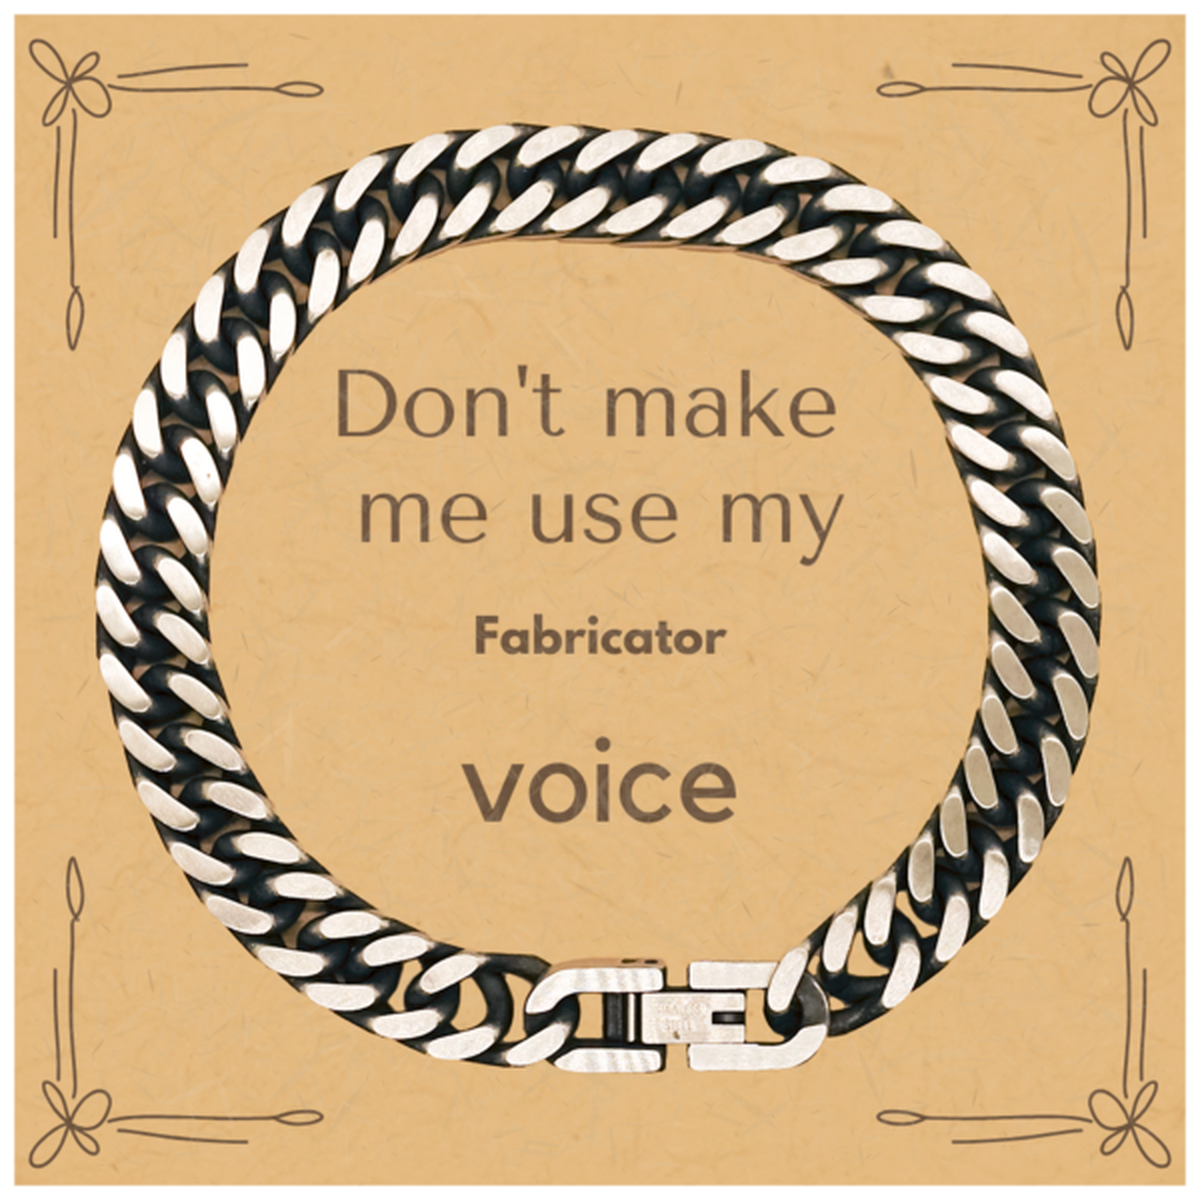 Don't make me use my Fabricator voice, Sarcasm Fabricator Card Gifts, Christmas Fabricator Cuban Link Chain Bracelet Birthday Unique Gifts For Fabricator Coworkers, Men, Women, Colleague, Friends